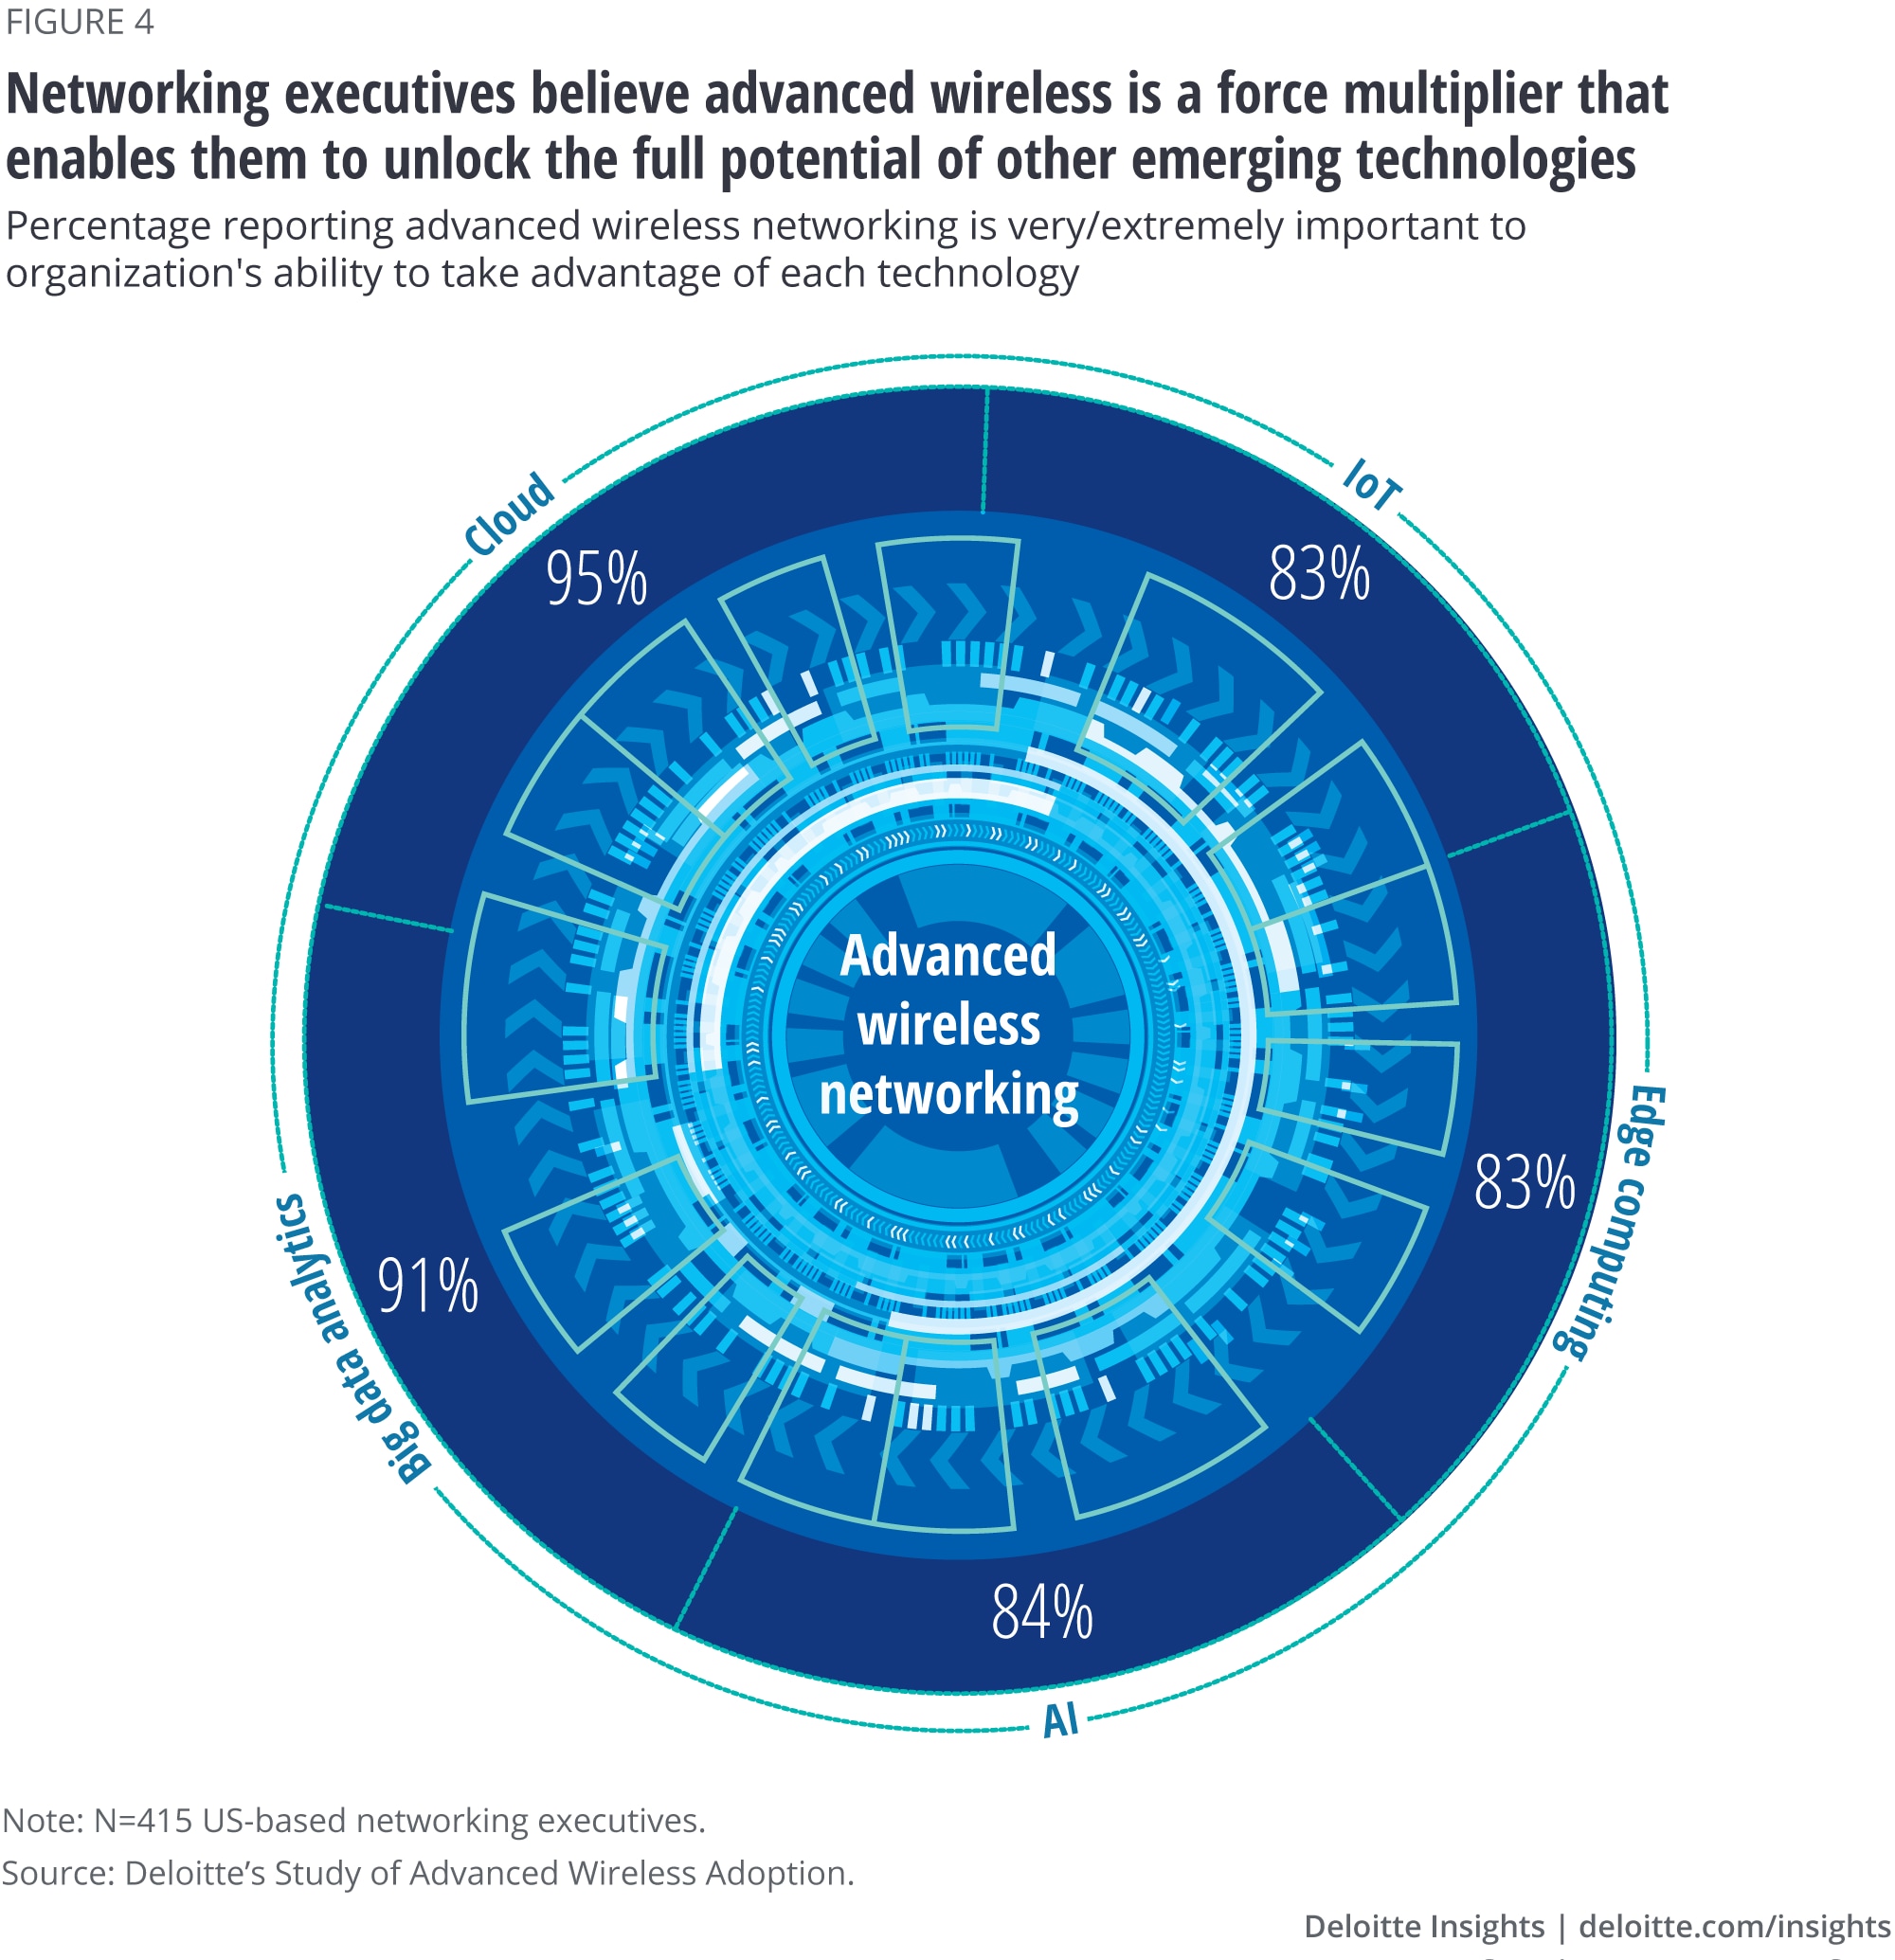 Networking executives believe advanced wireless is a force multiplier that enables them to unlock the full potential of other emerging technologies